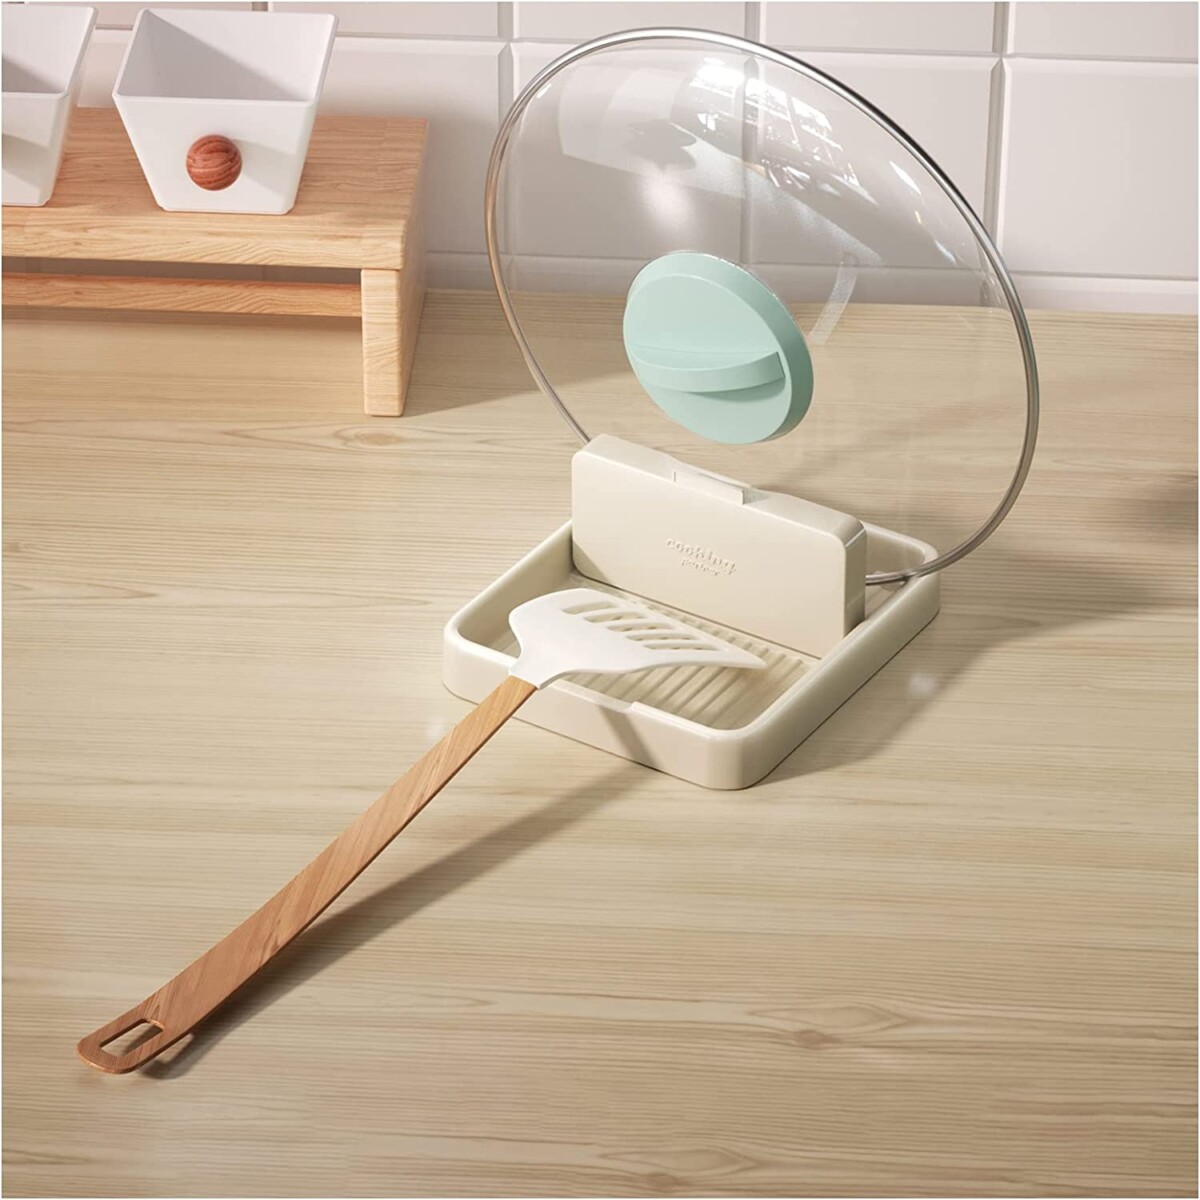 Alea's Deals {{50% OFF}} Spoon Rest with Pot Lid Holder  